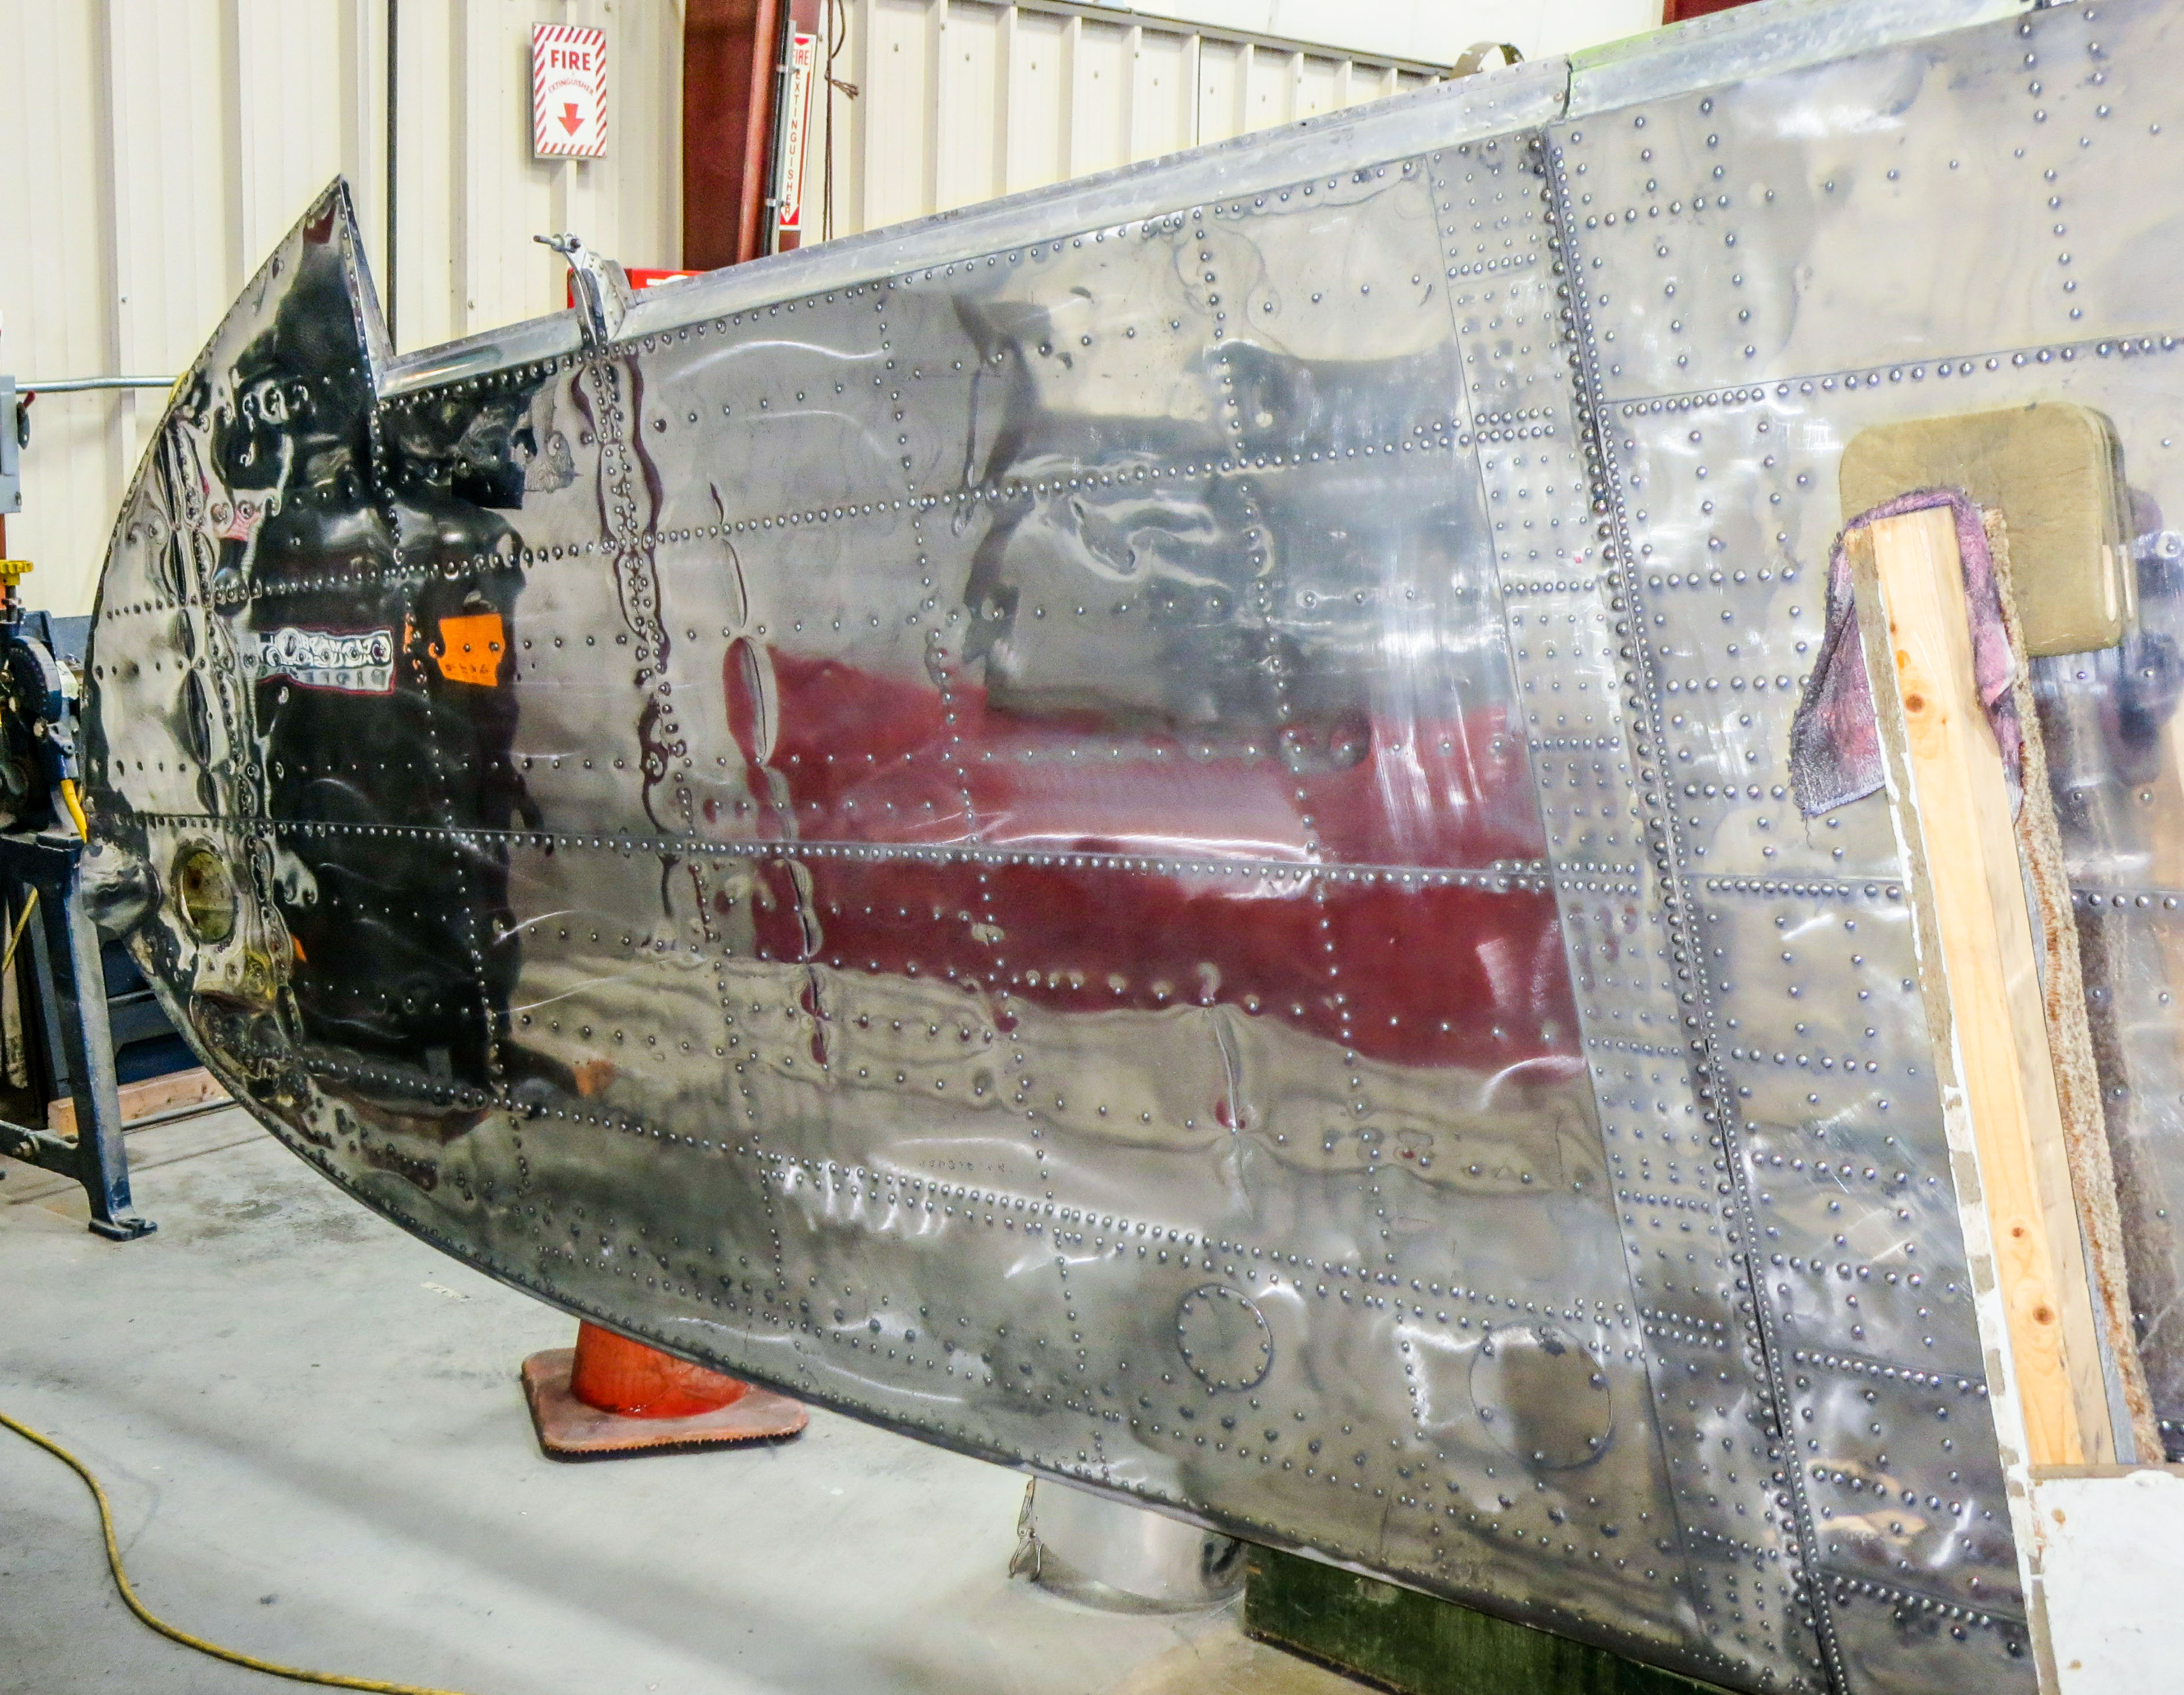 A view of the port wing tip following polishing which shows how well the efforts are progressing. (photo via NEAM)